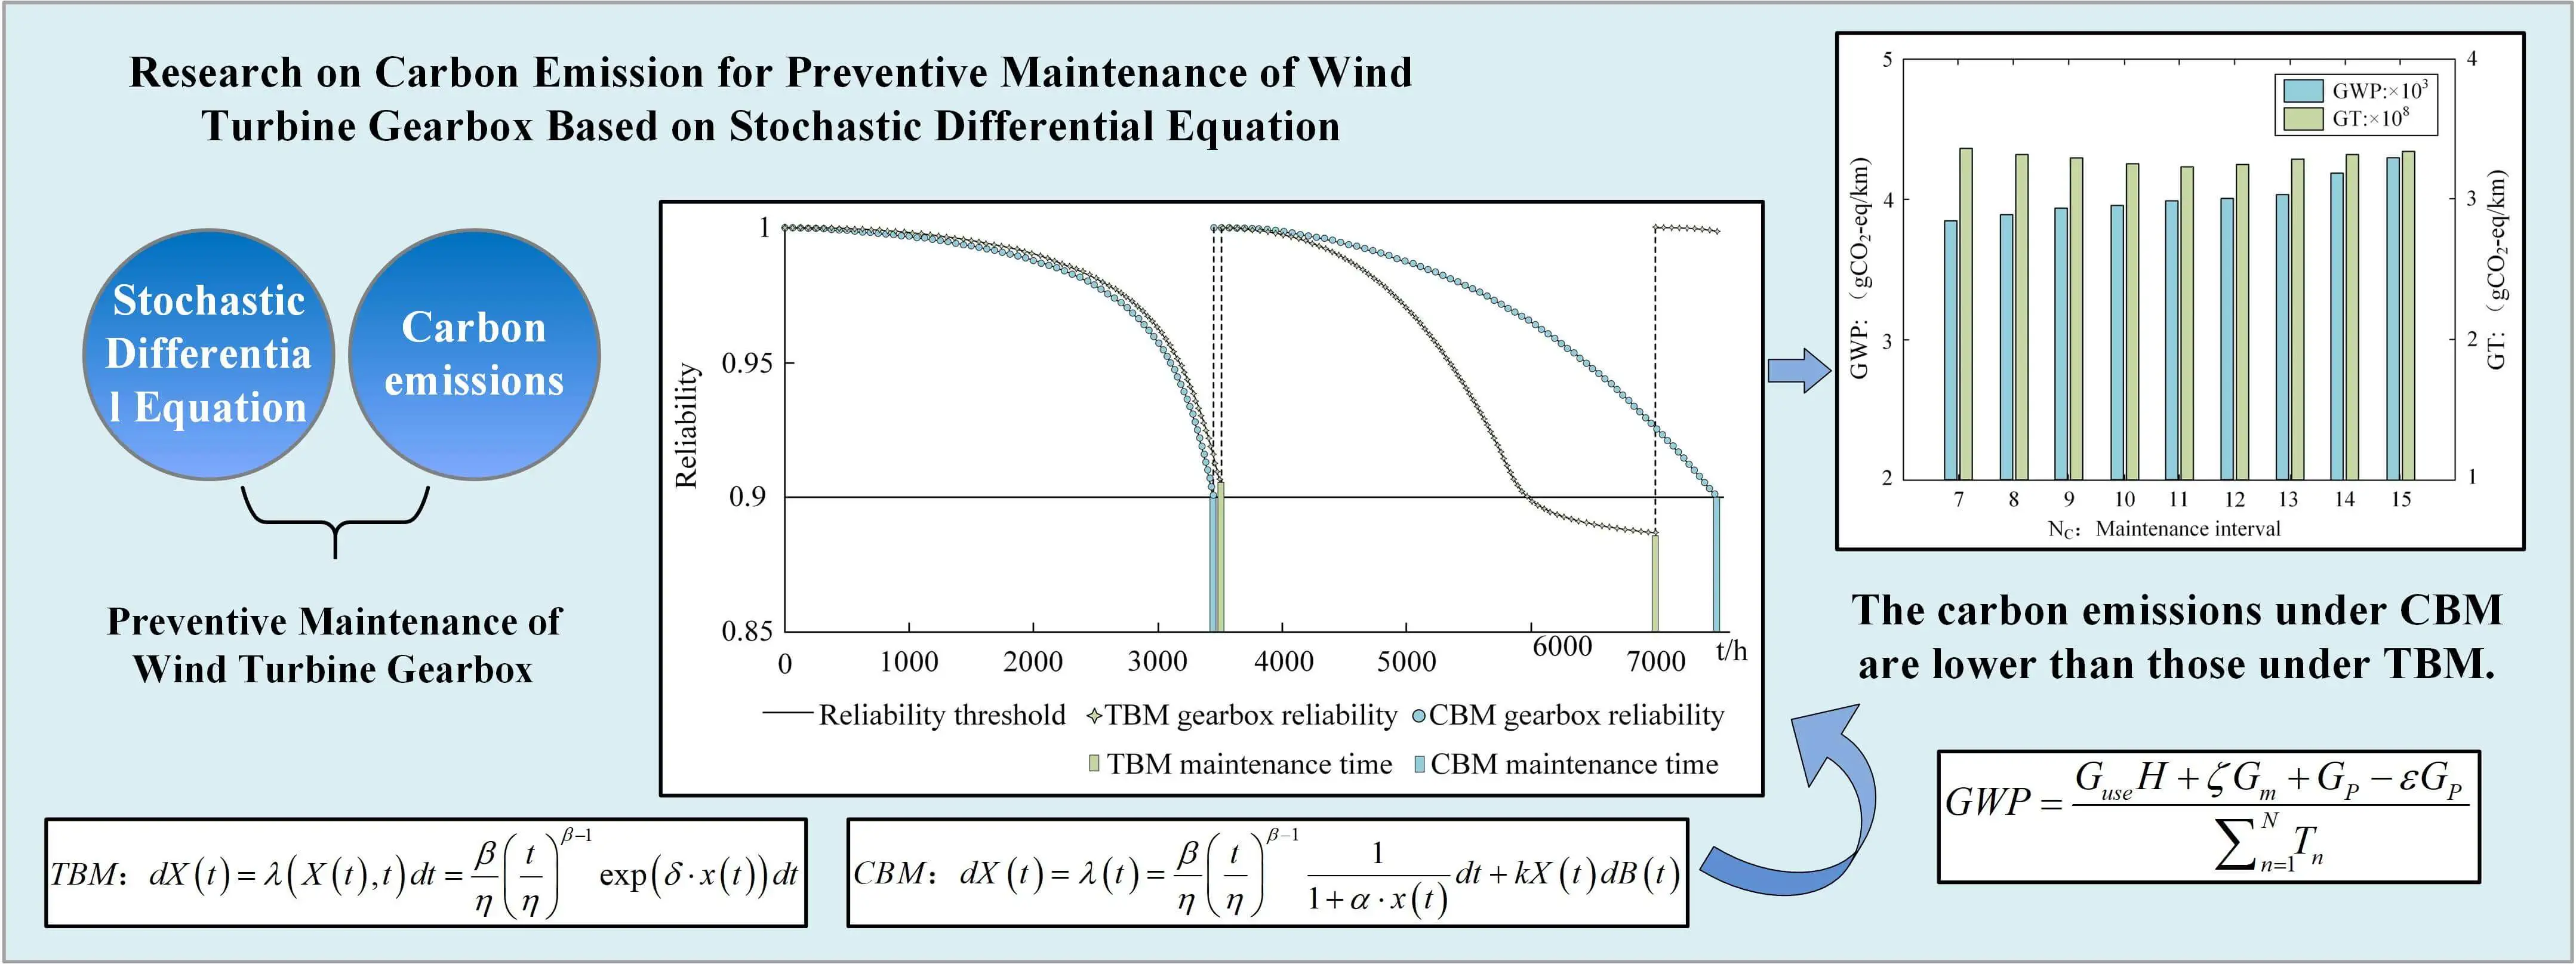 Research on Carbon Emission for Preventive Maintenance of Wind Turbine Gearbox Based on Stochastic Differential Equation